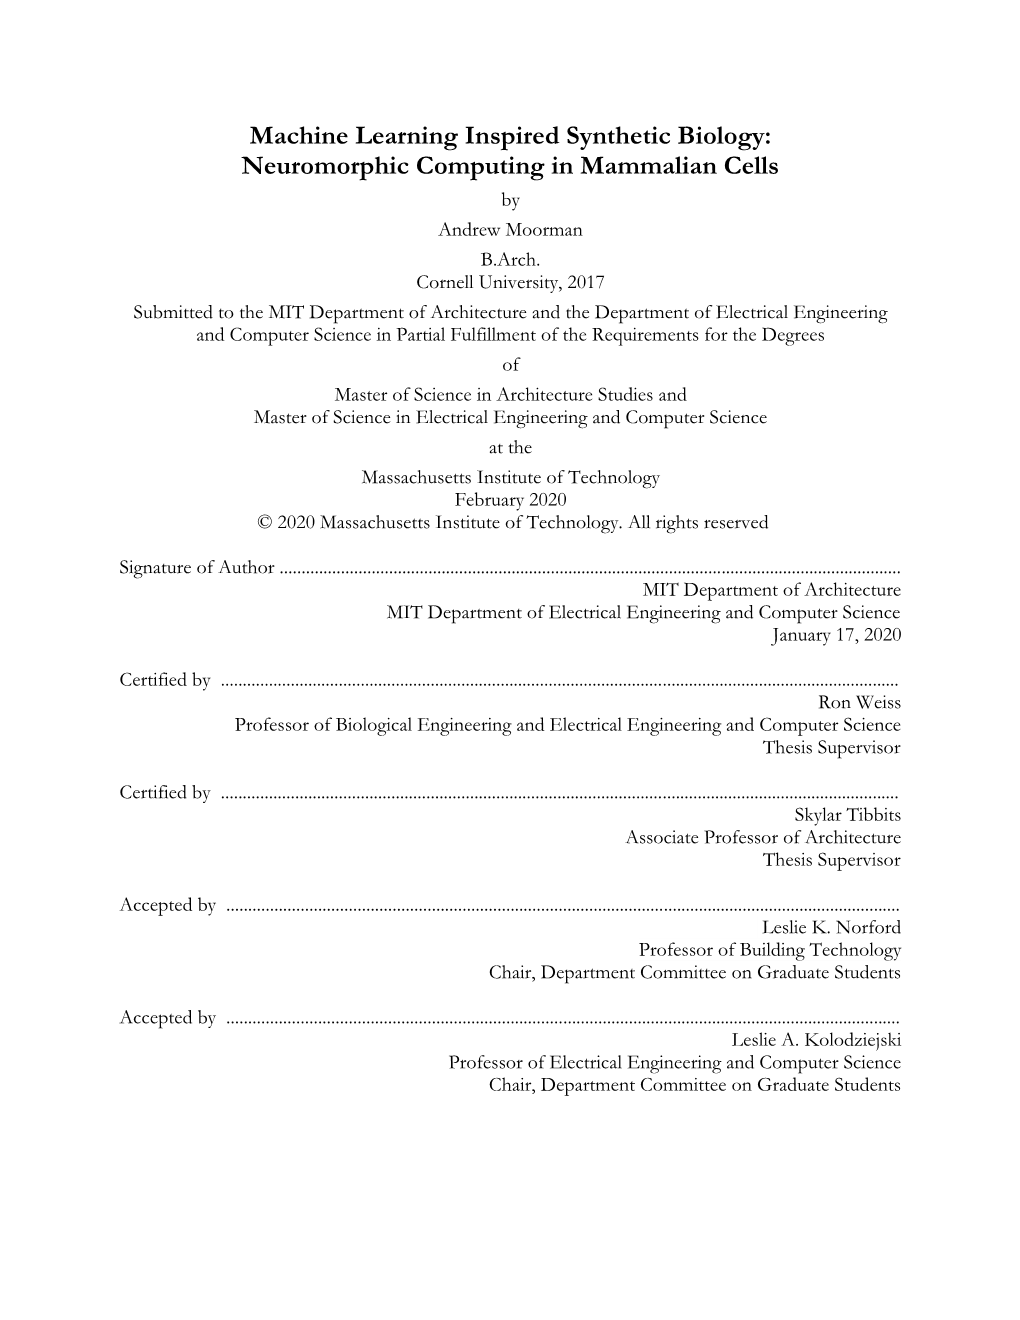 Machine Learning Inspired Synthetic Biology: Neuromorphic Computing in Mammalian Cells by Andrew Moorman